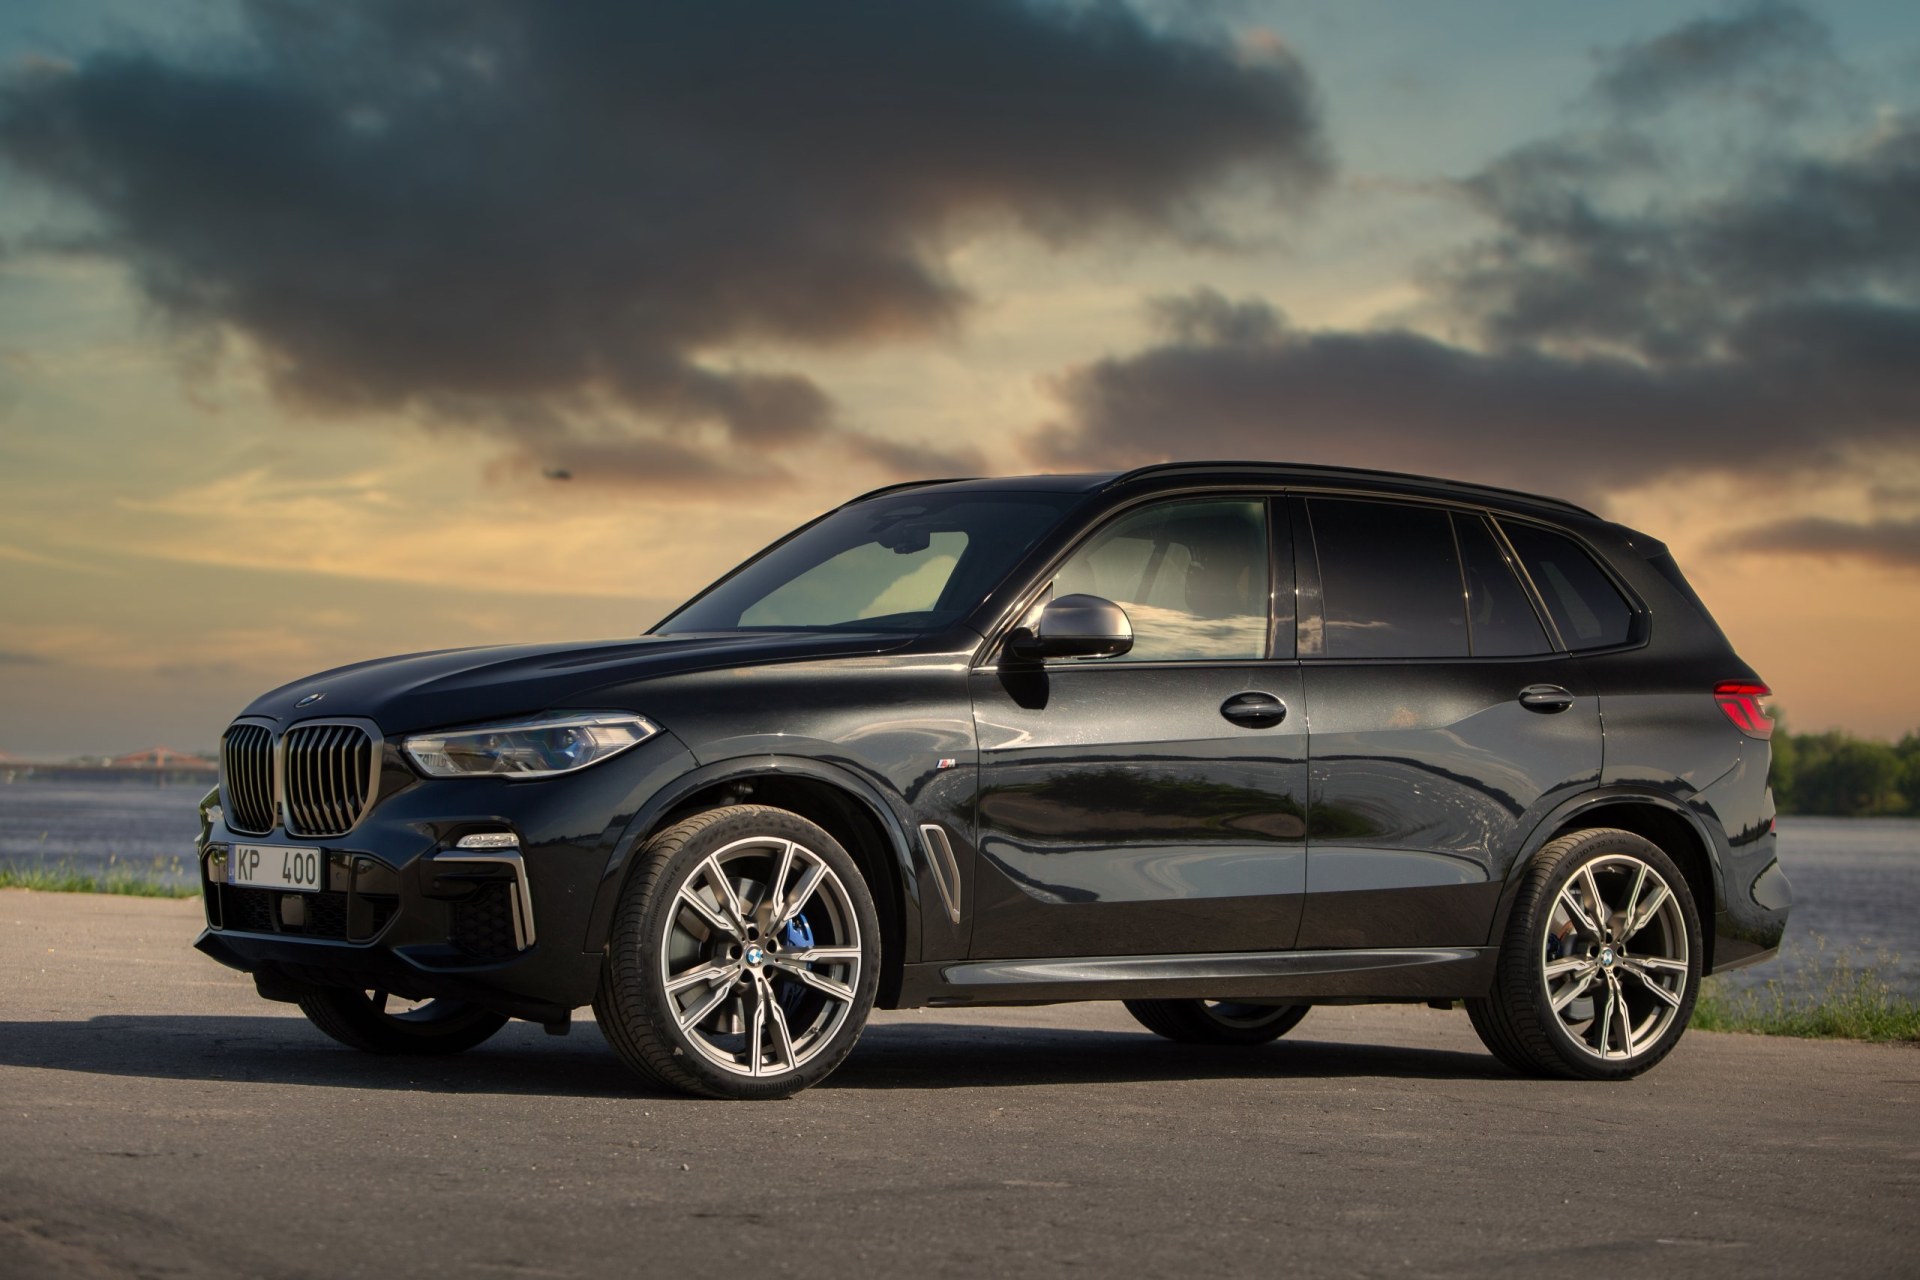 2020 BMW X5 G05 near river at the sunset